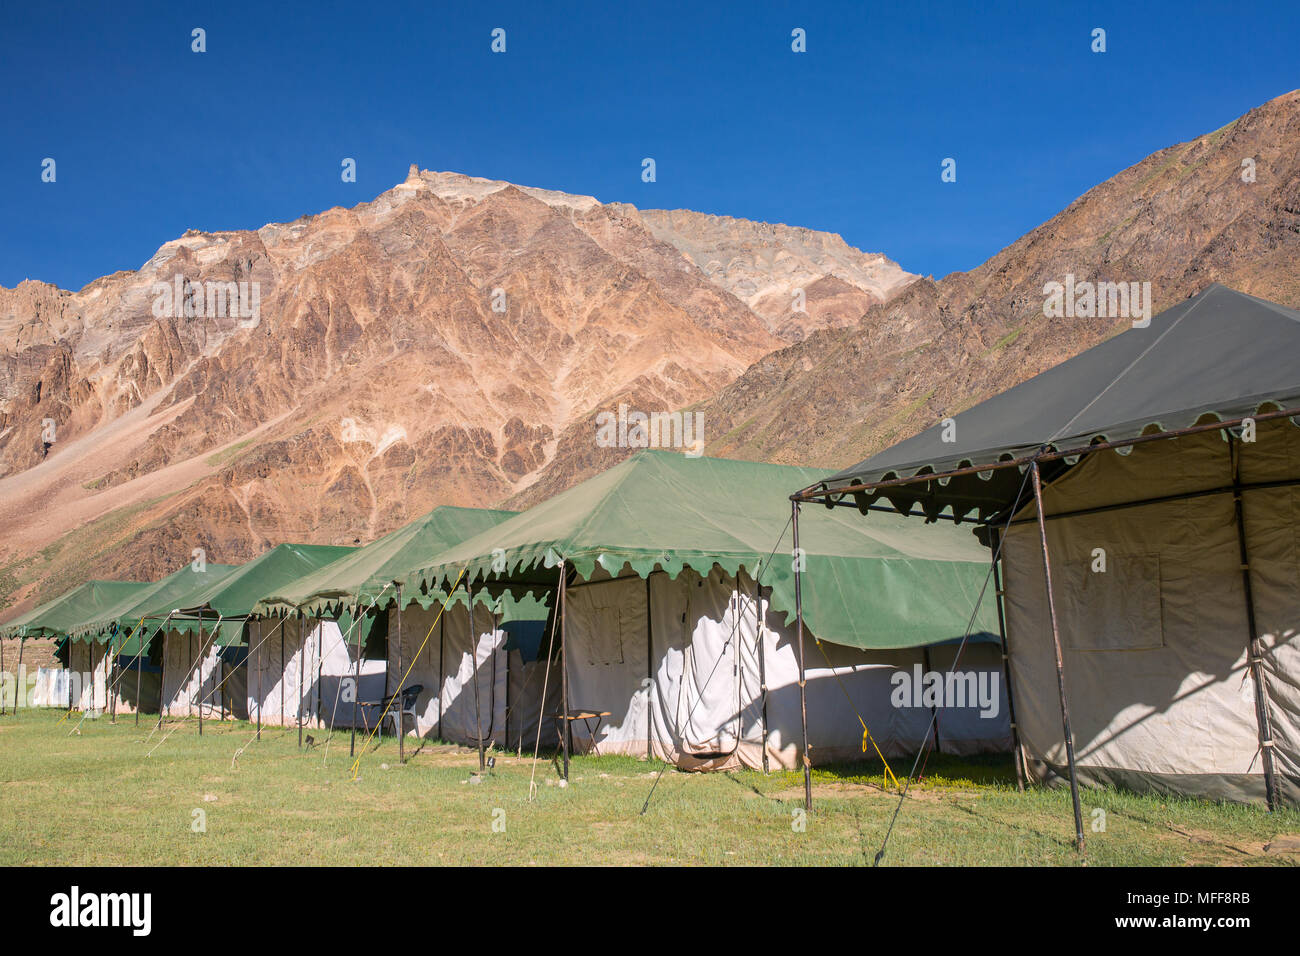 Sarchu camping tents at the Leh - Manali Highway in Ladakh region, Northern India. Stock Photo